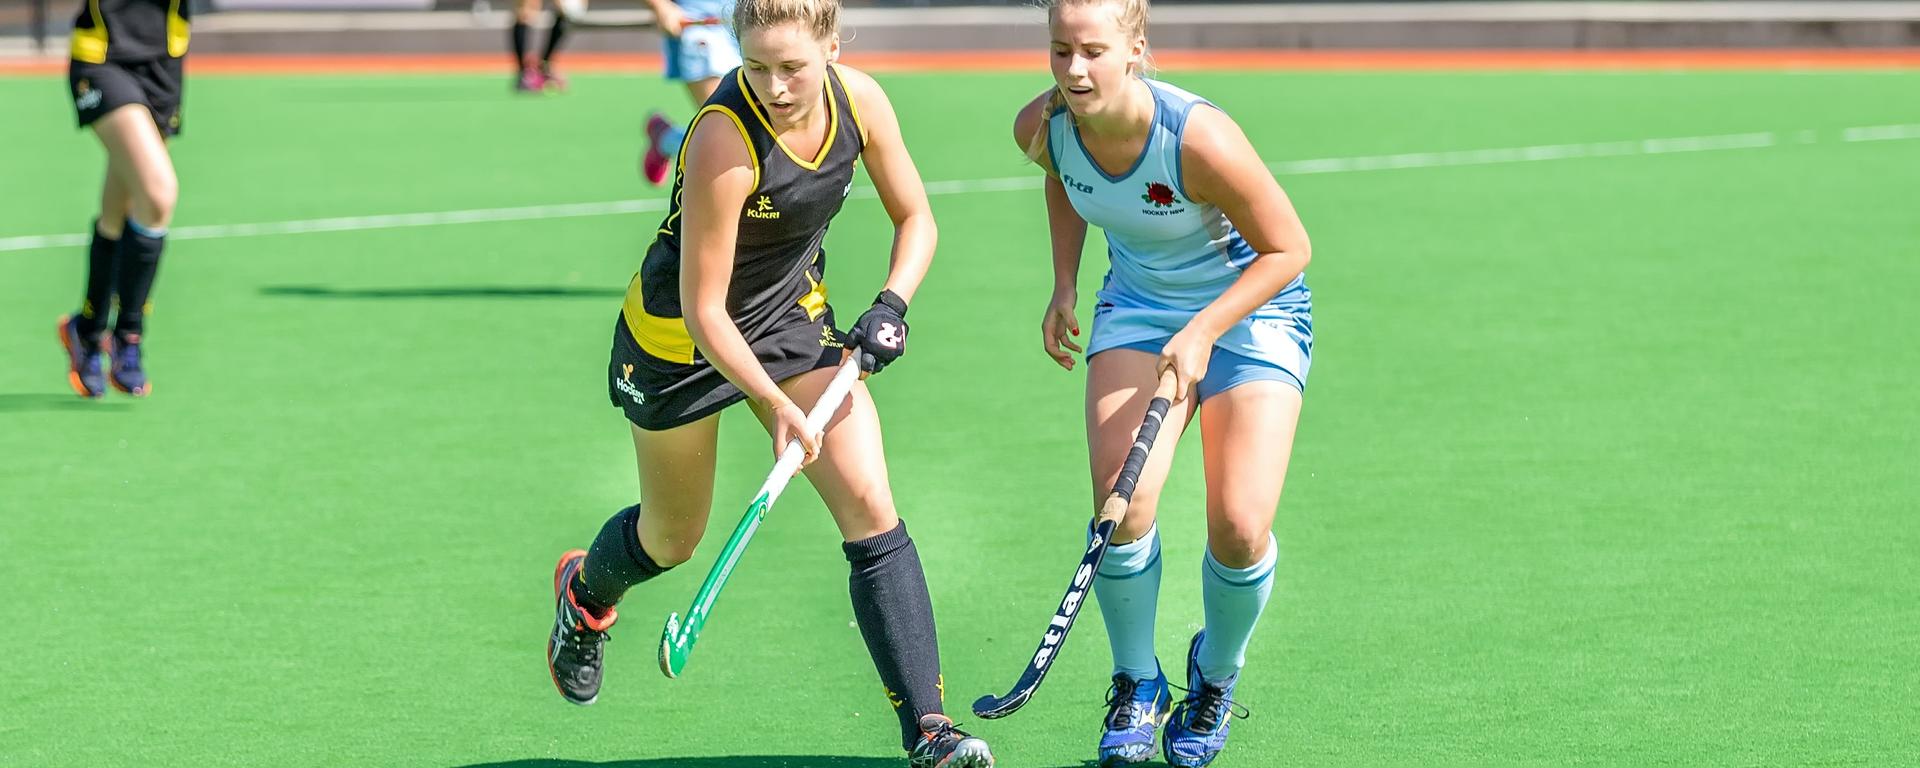 Field hockey players chasing the ball